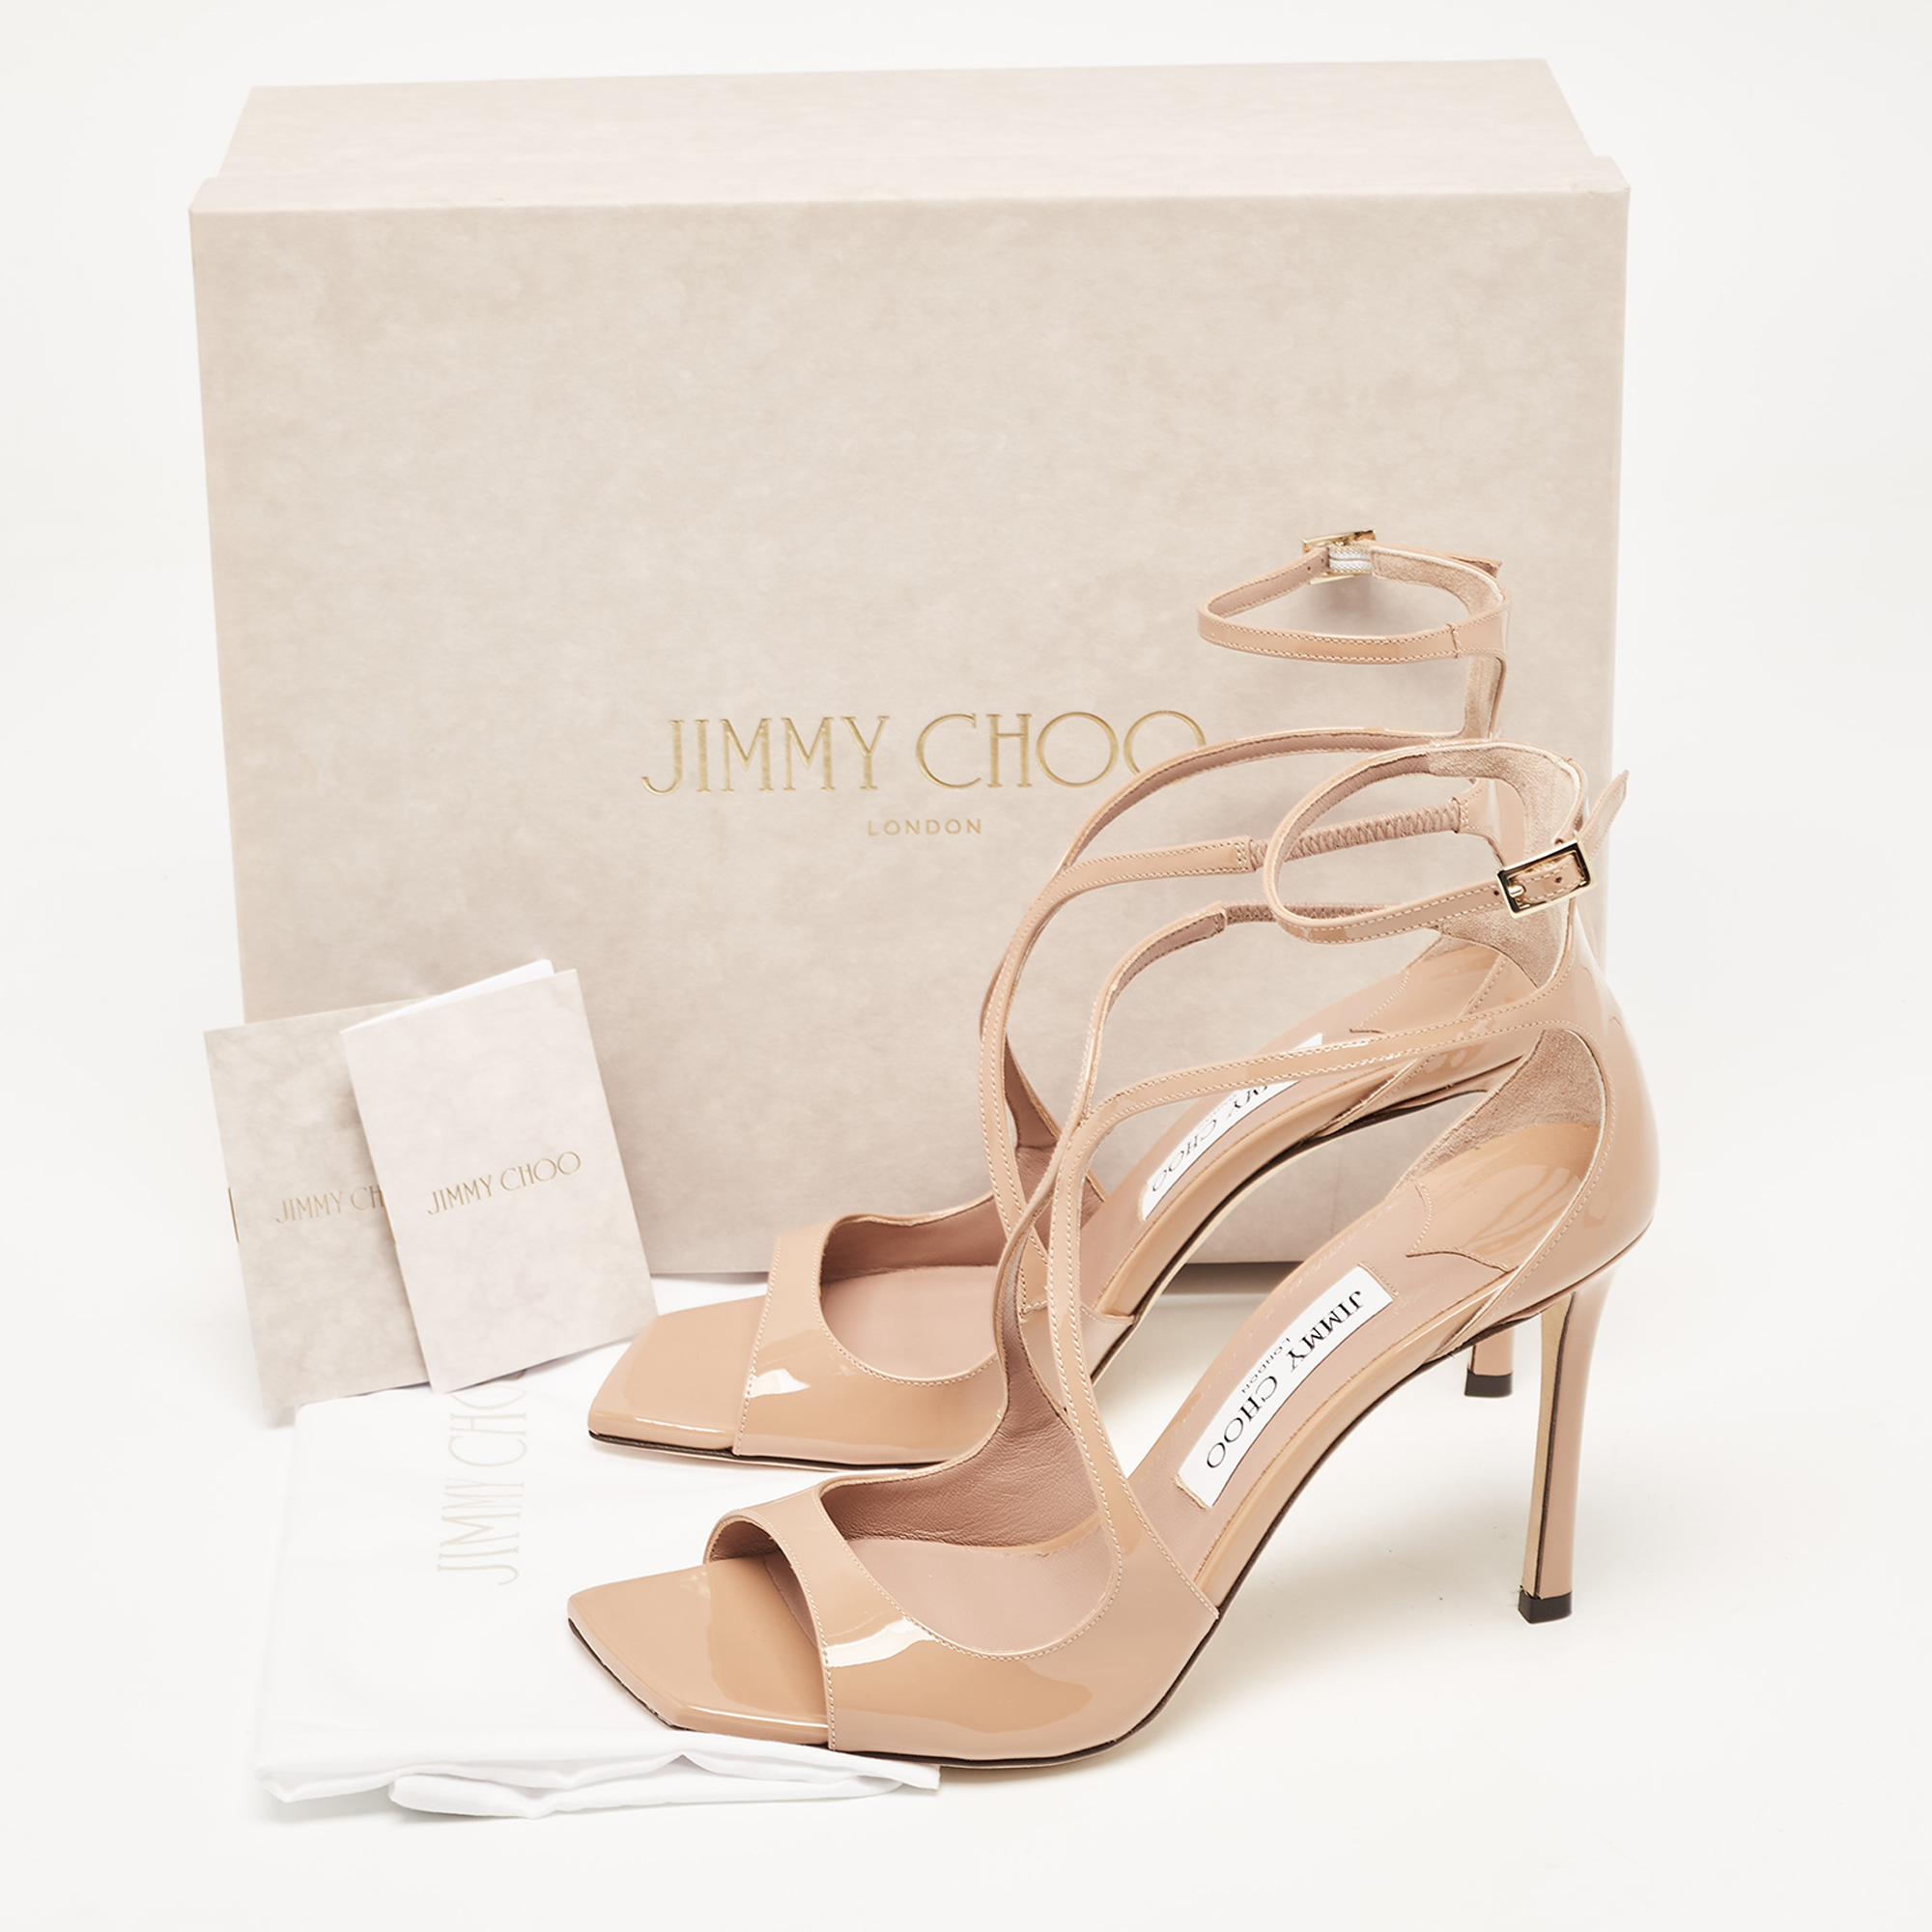 Jimmy Choo Beige Patent Leather Azia Ankle Strap Sandals Size 38